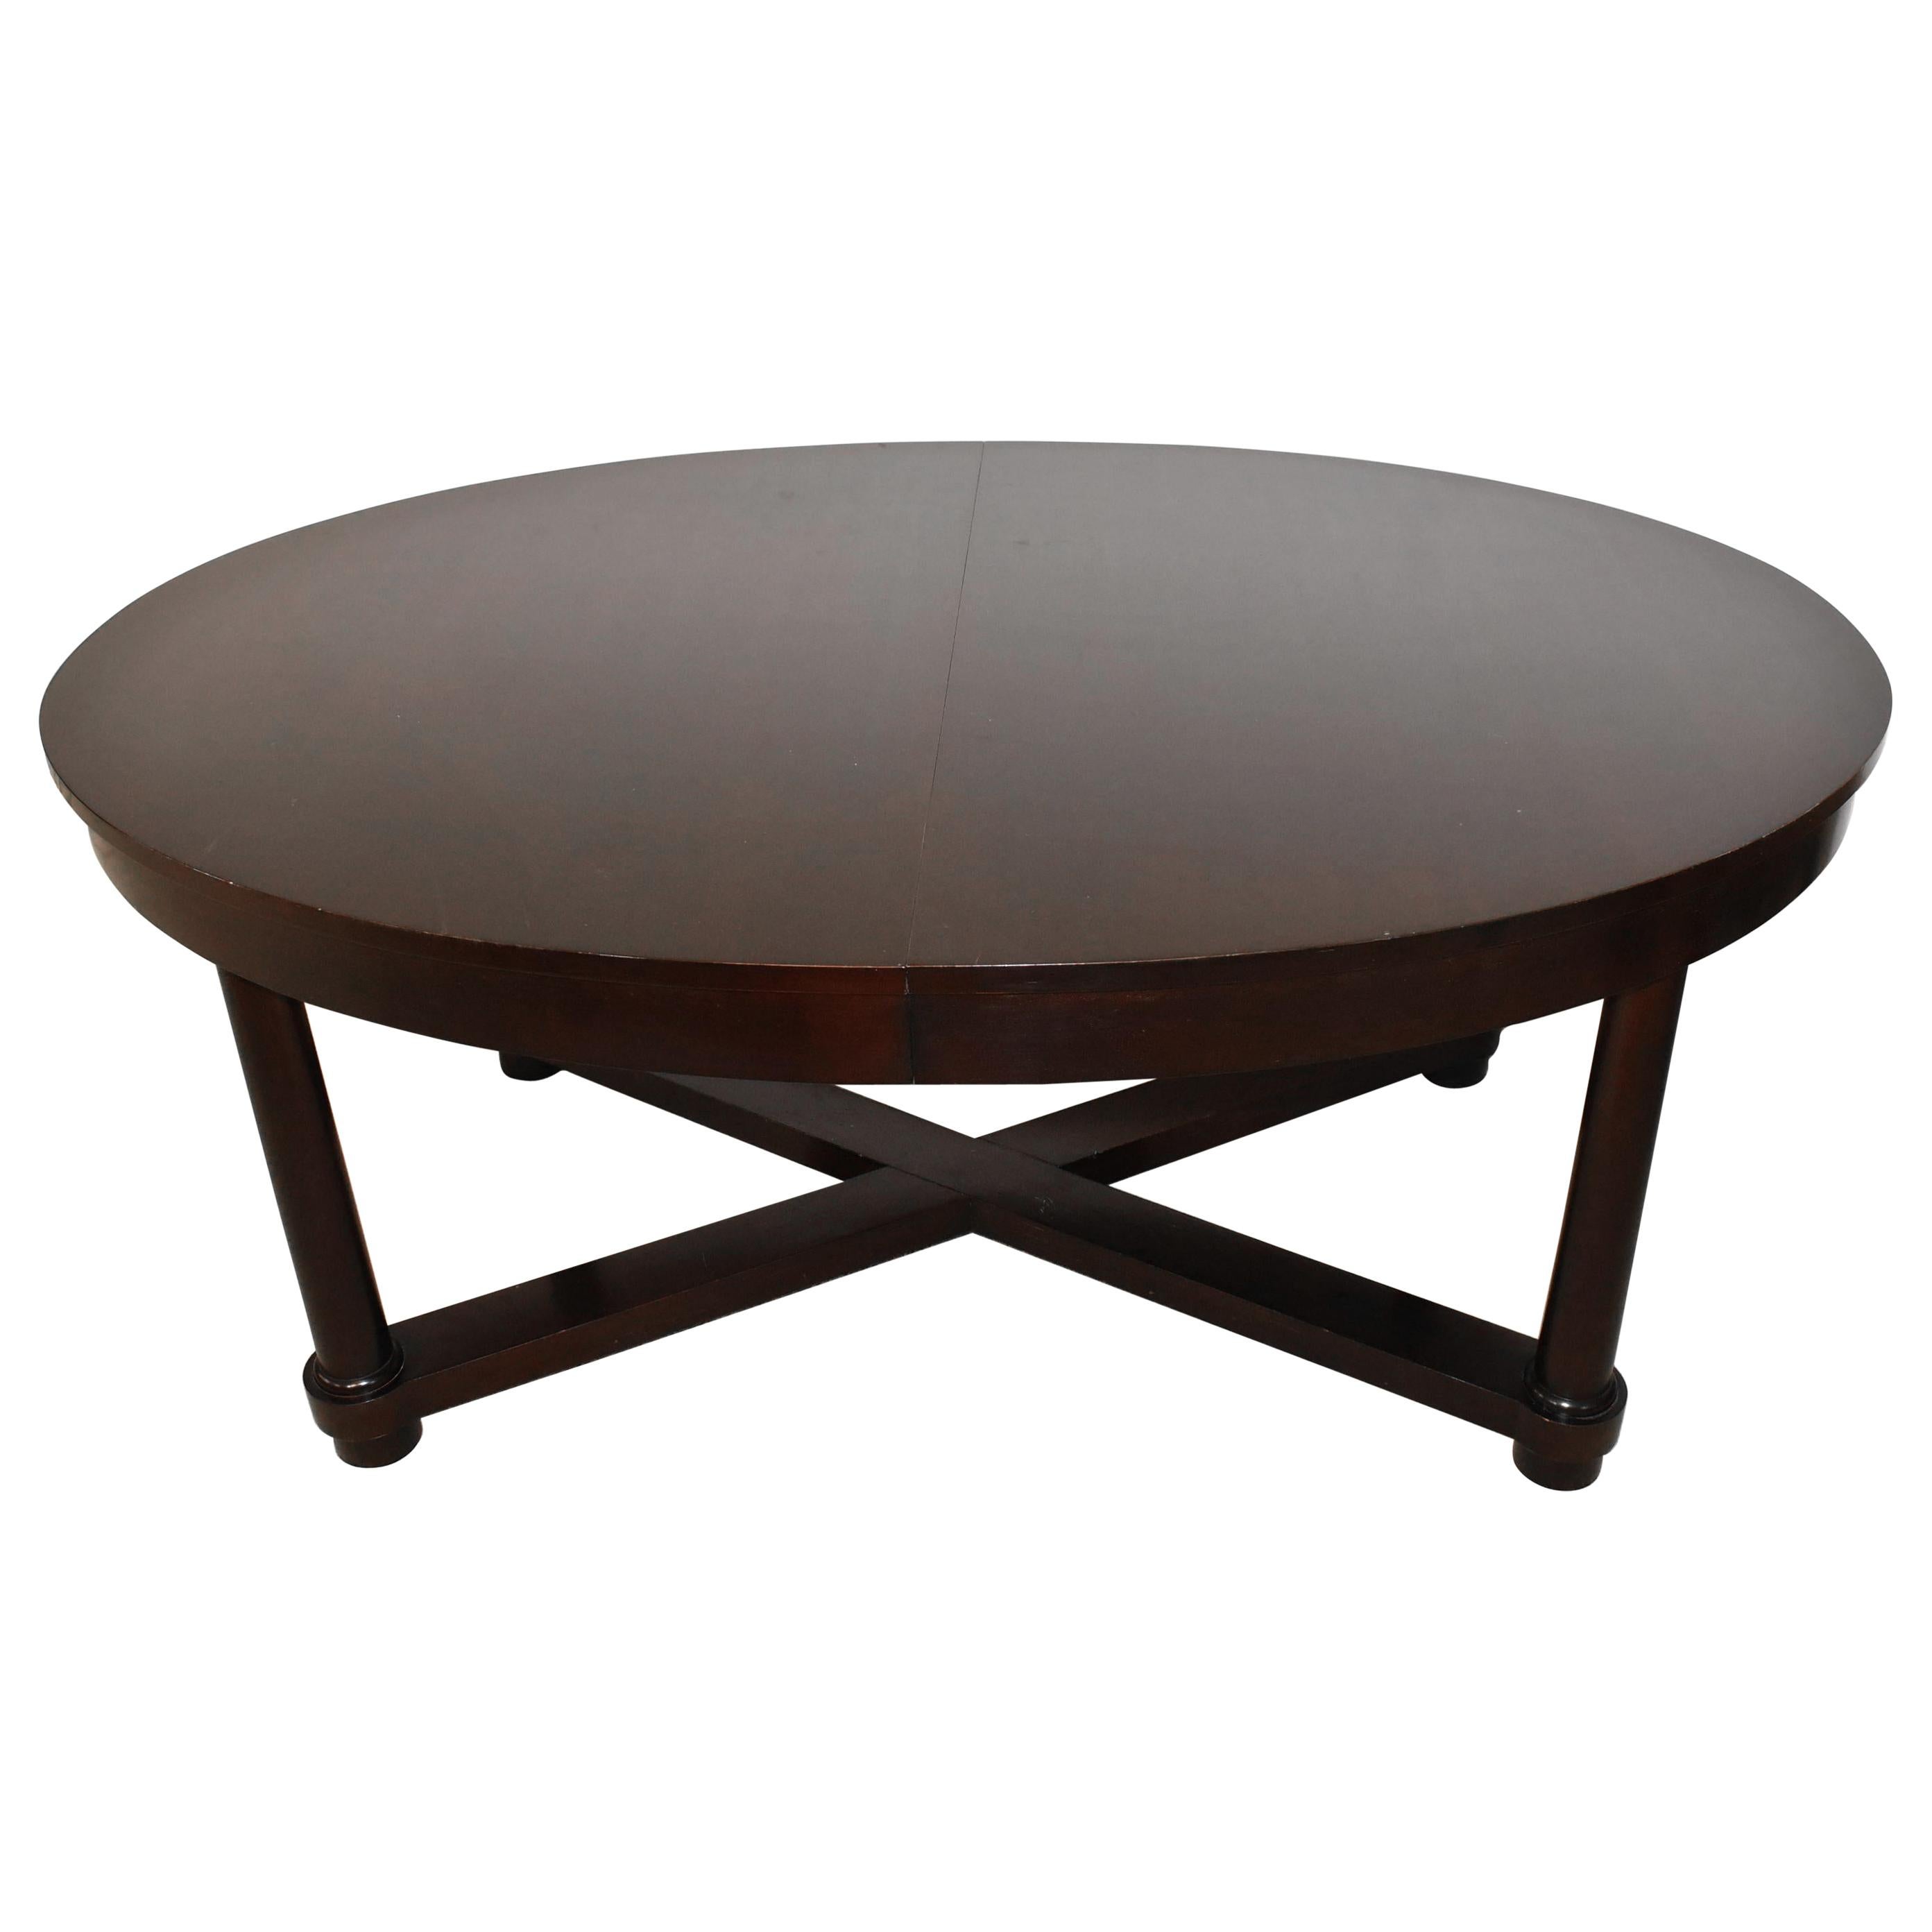 Baker Furniture Barbara Barry Collection Oval Table Espresso Finish X Base